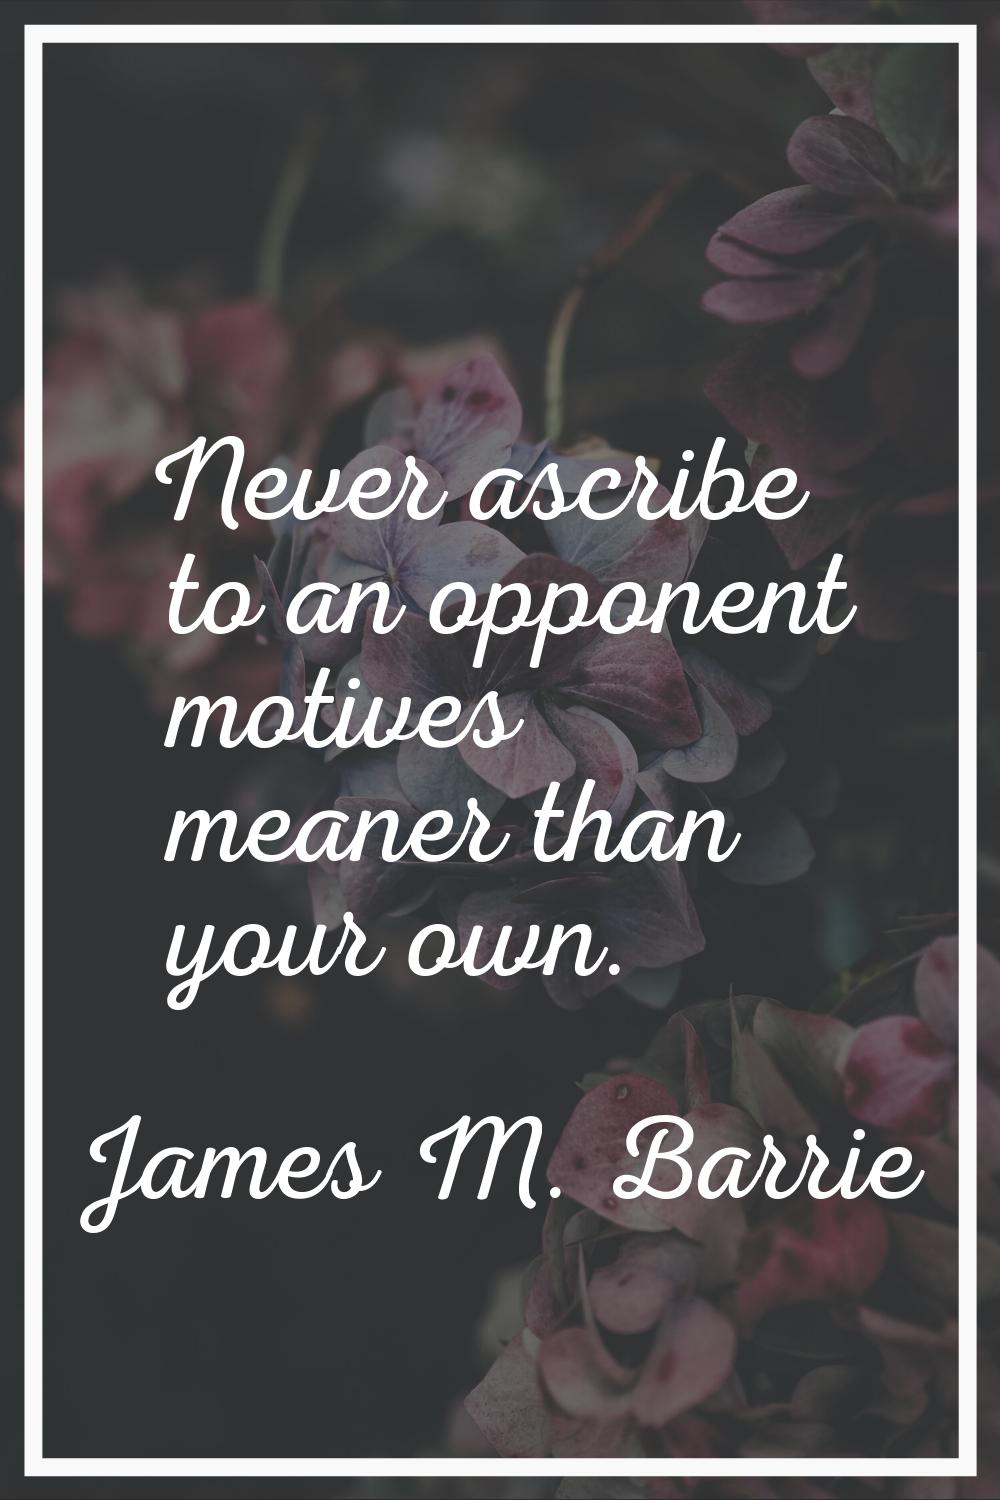 Never ascribe to an opponent motives meaner than your own.